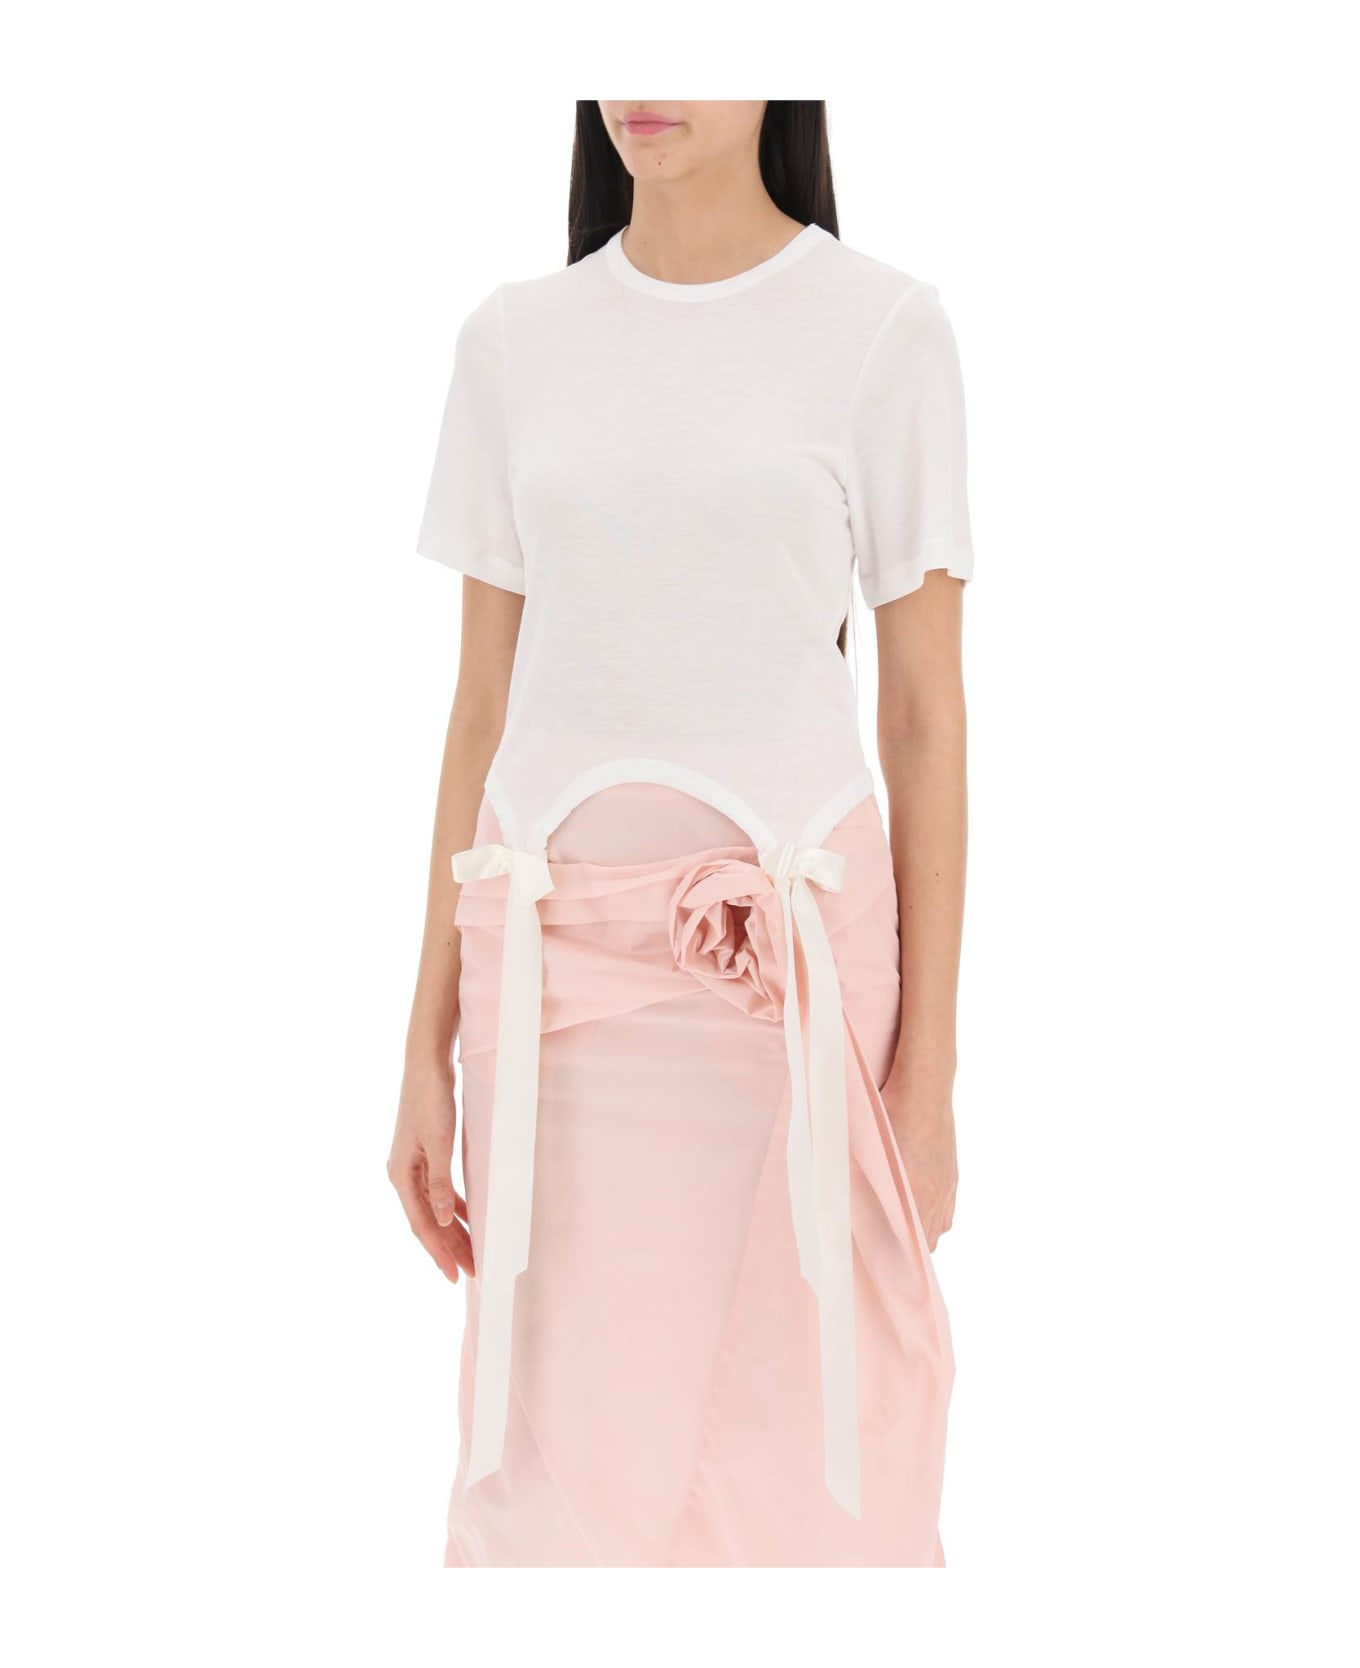 Simone Rocha Easy T-shirt With Bow Tails - IVORY (White)